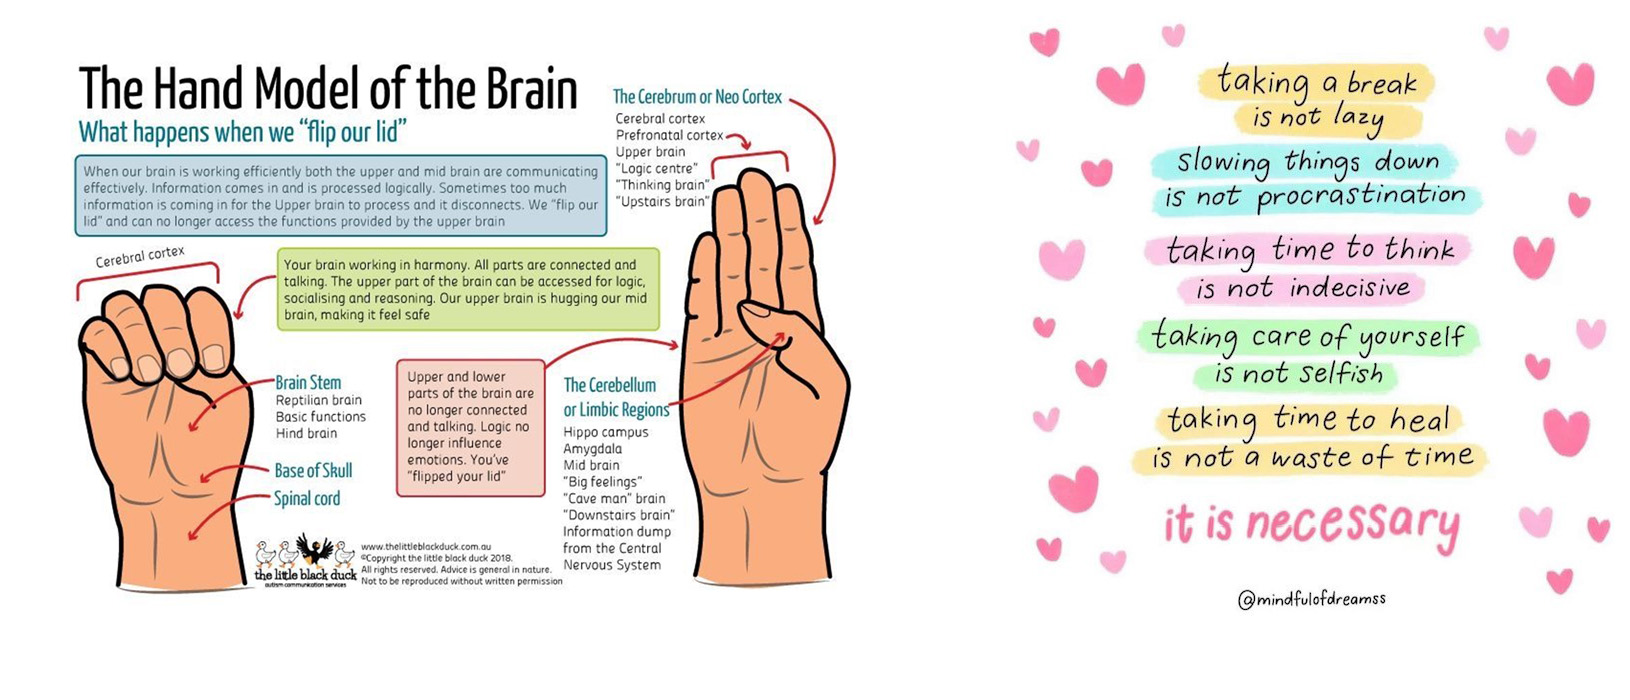 The hand model of the brain, and some reminders to yourself.